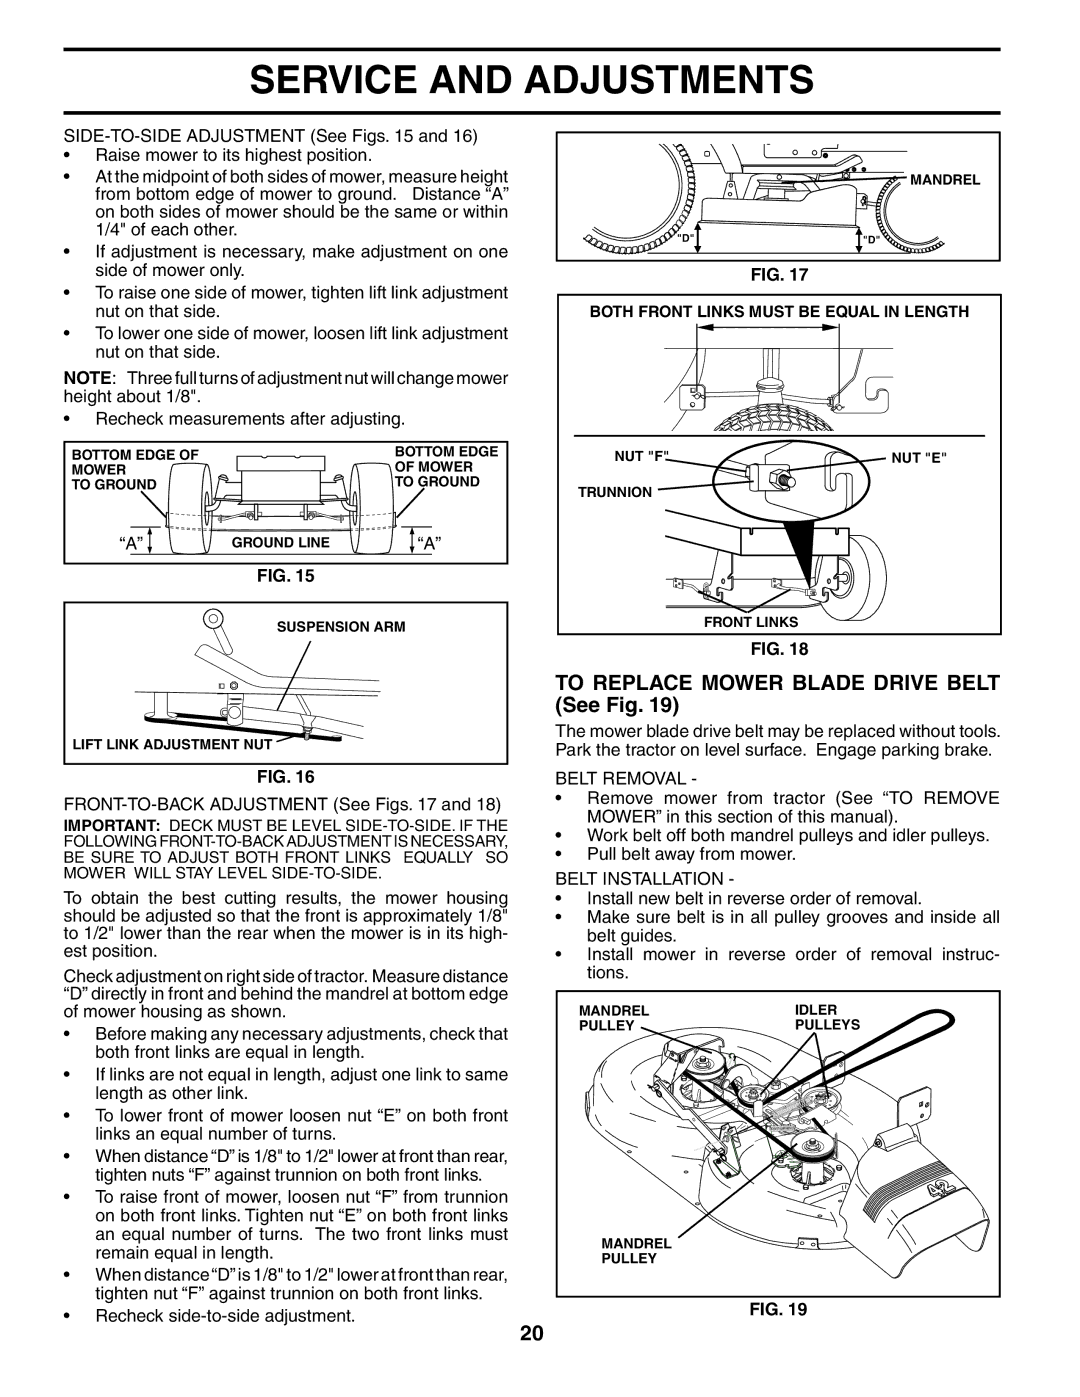 Poulan 197022 manual To Replace Mower Blade Drive Belt See Fig, Belt Removal, Belt Installation 